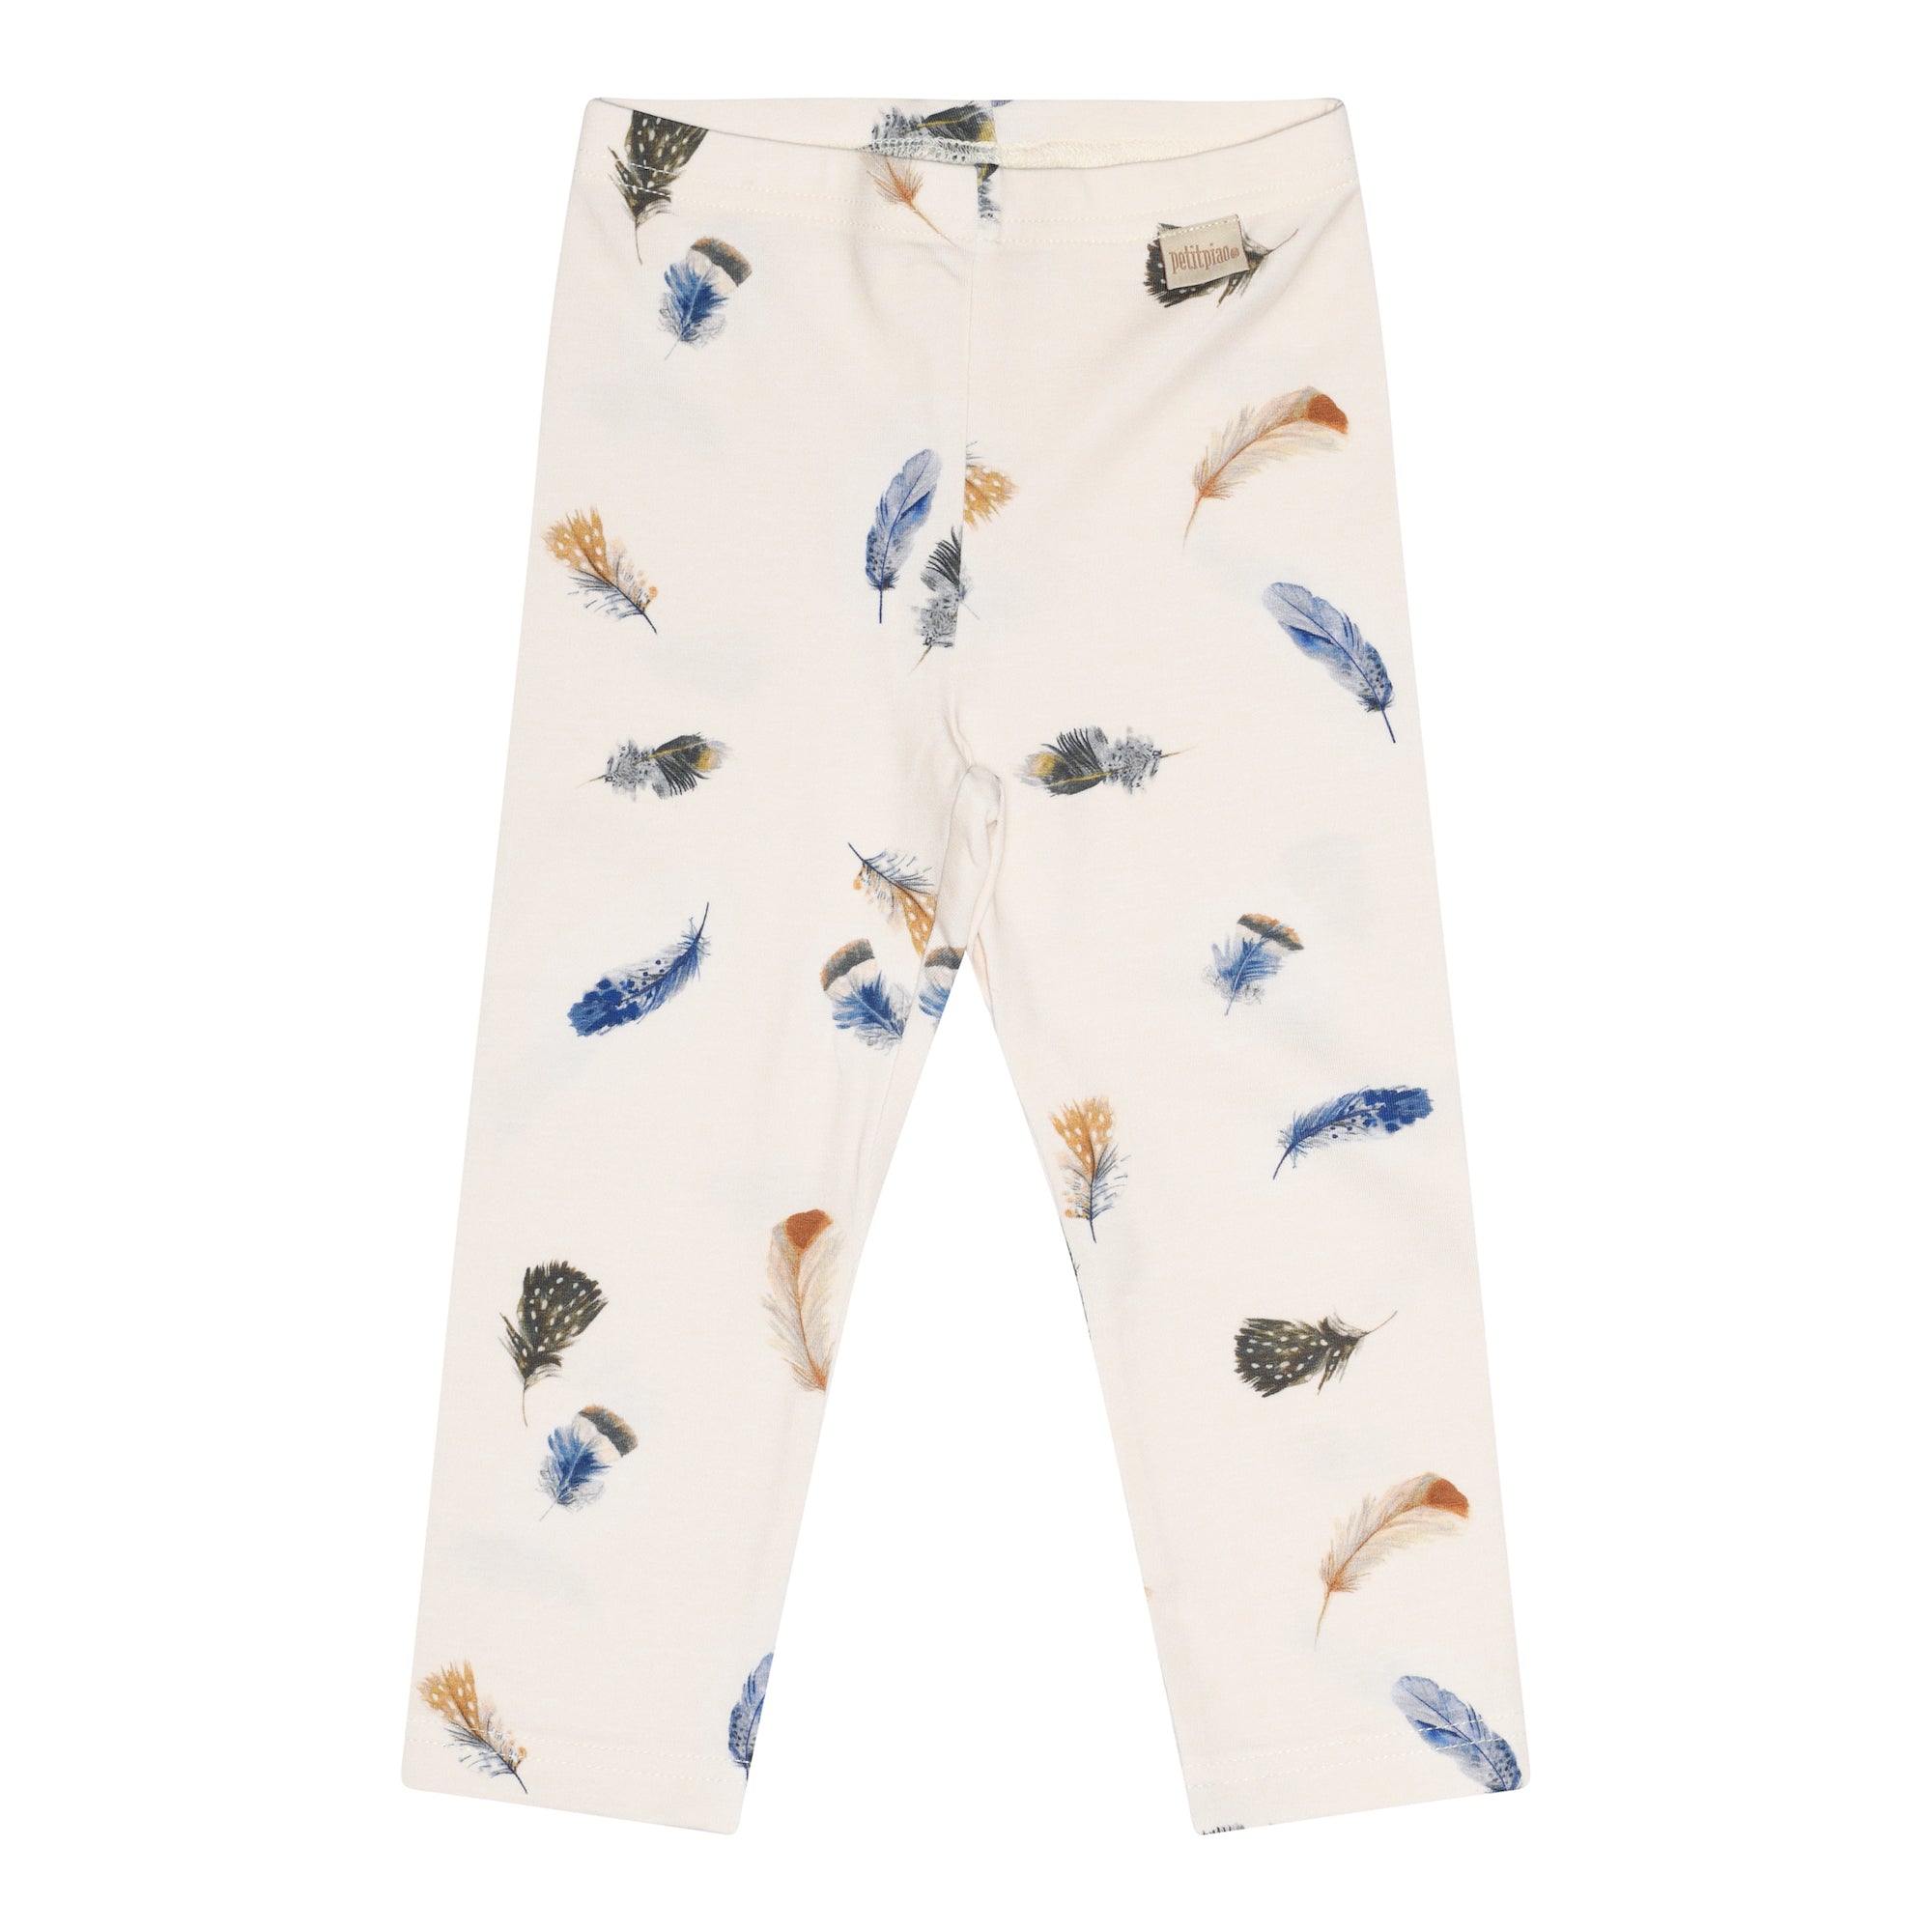 Petit Piao - Legging Printed, PP202 - Feather